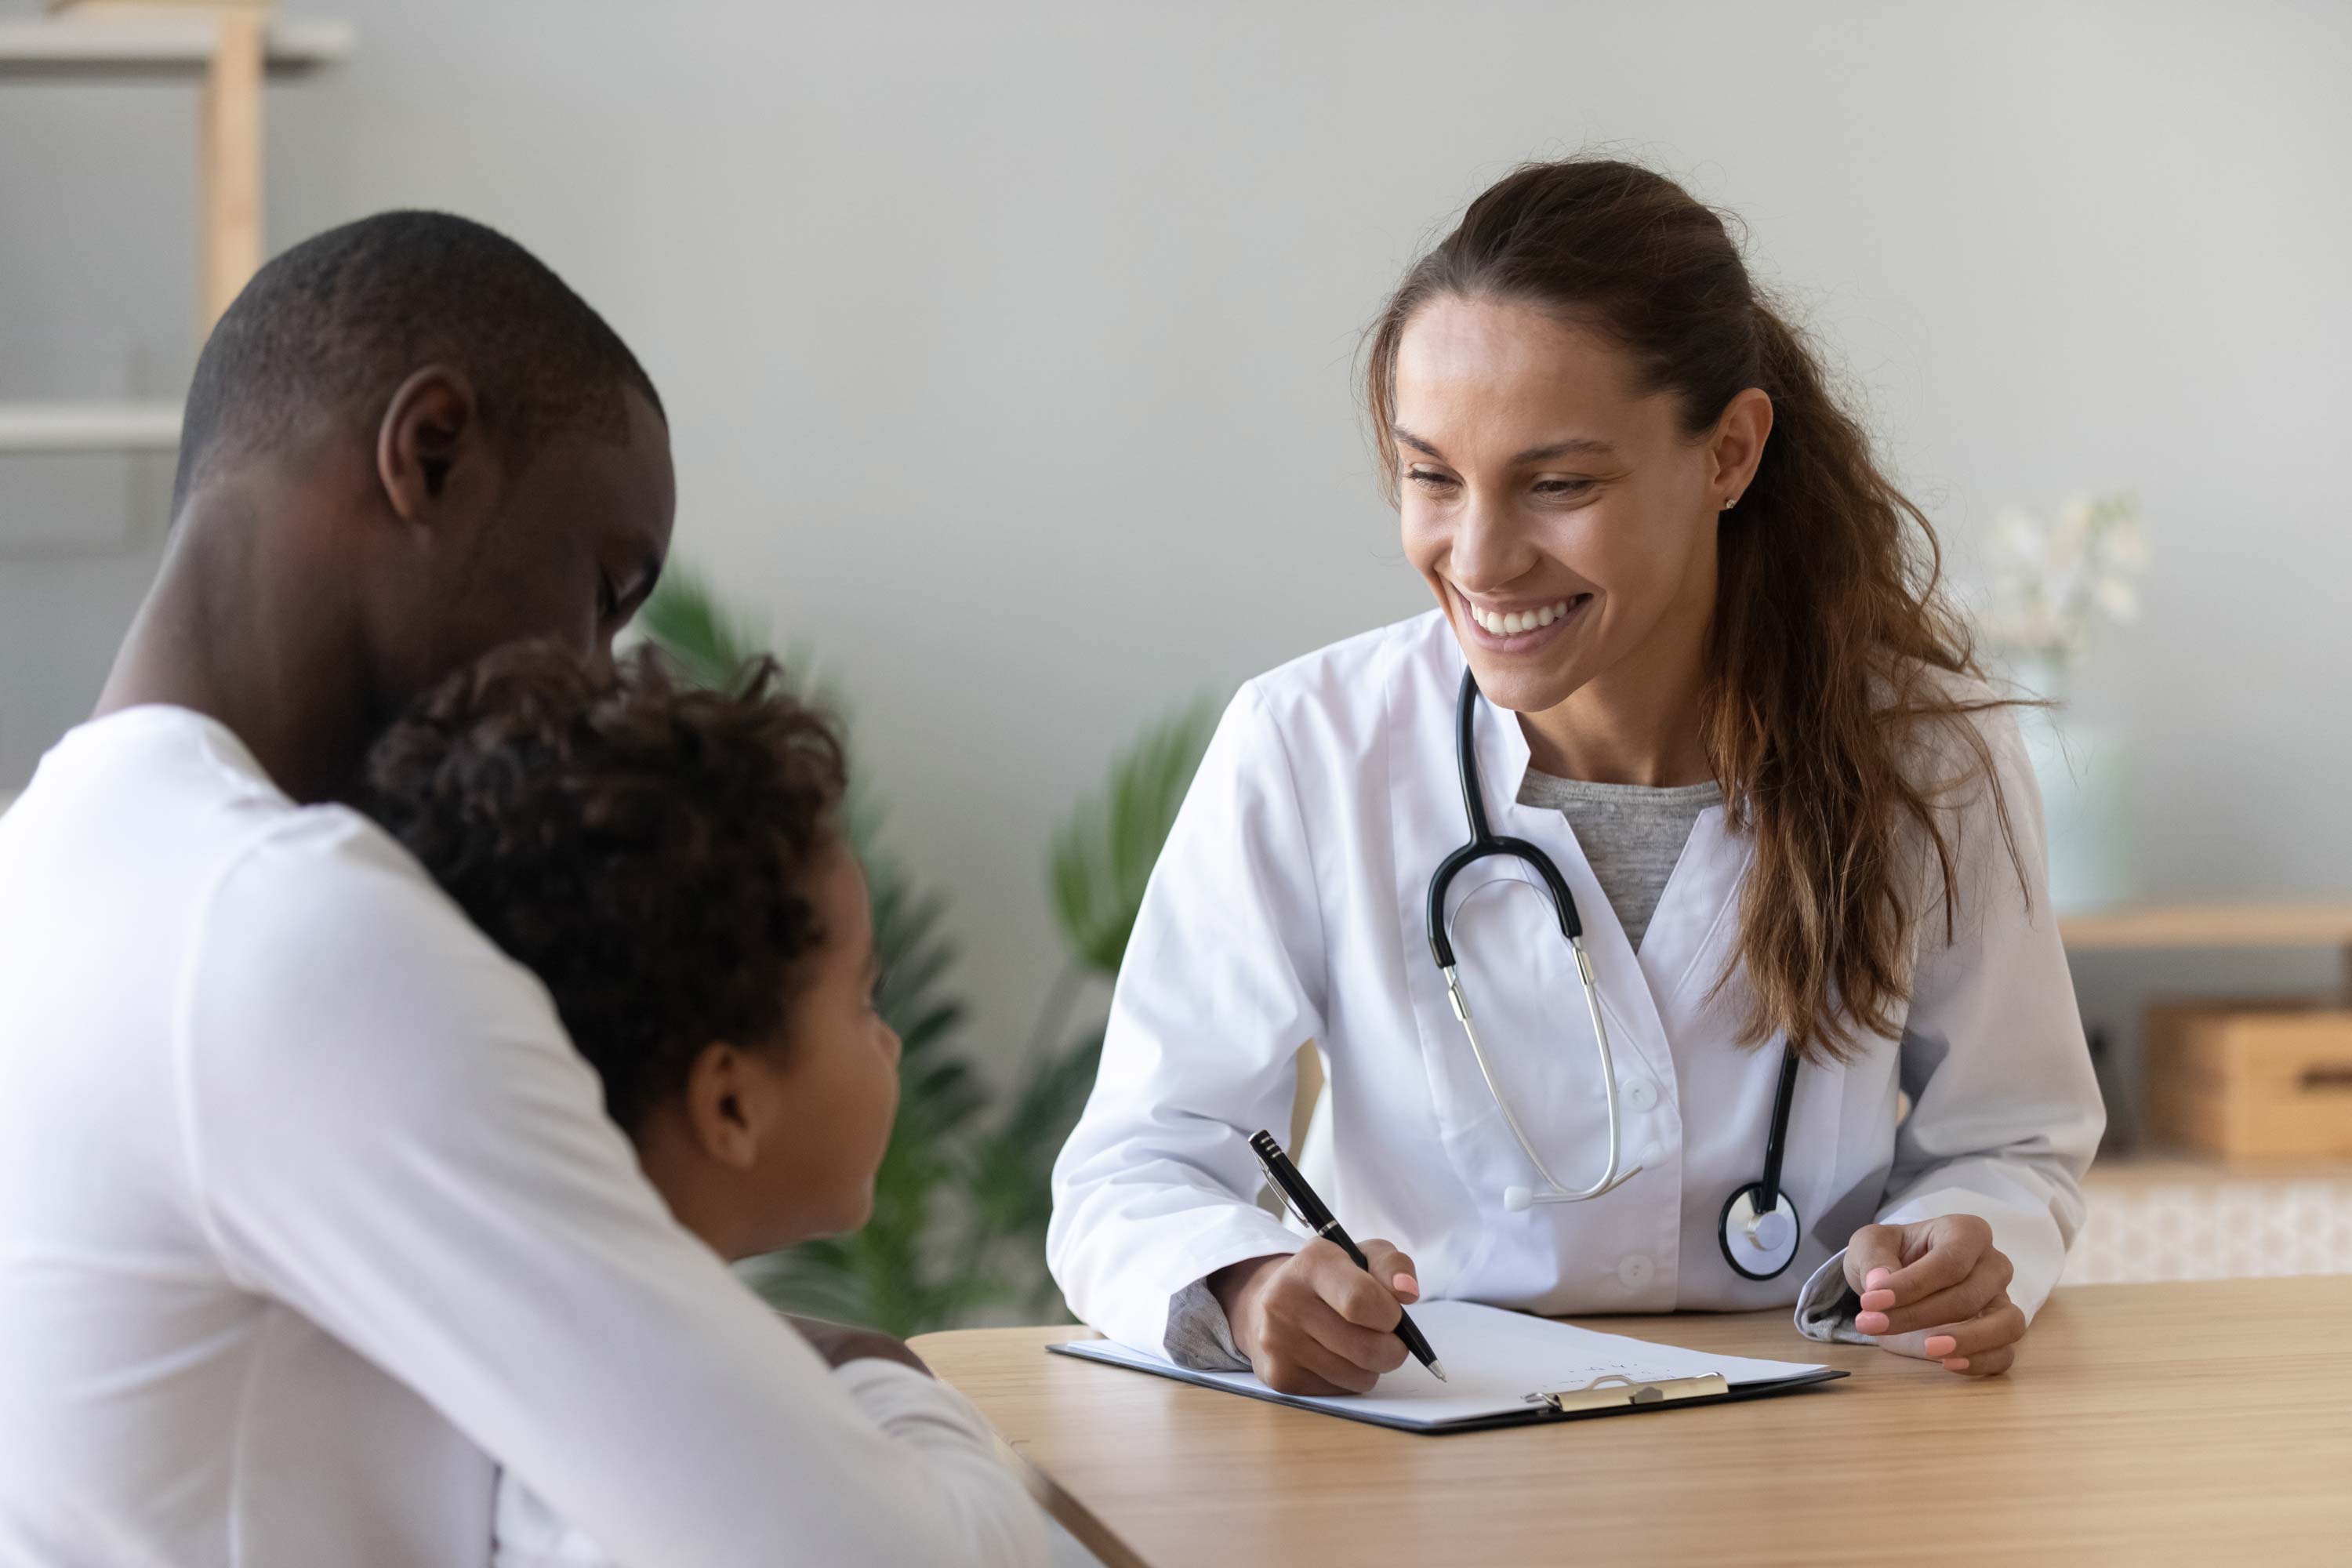 Image of a woman doctor smiling at a child patient and his father. The child is sitting on the father's lap, and they are facing the doctor who is seated at her table.